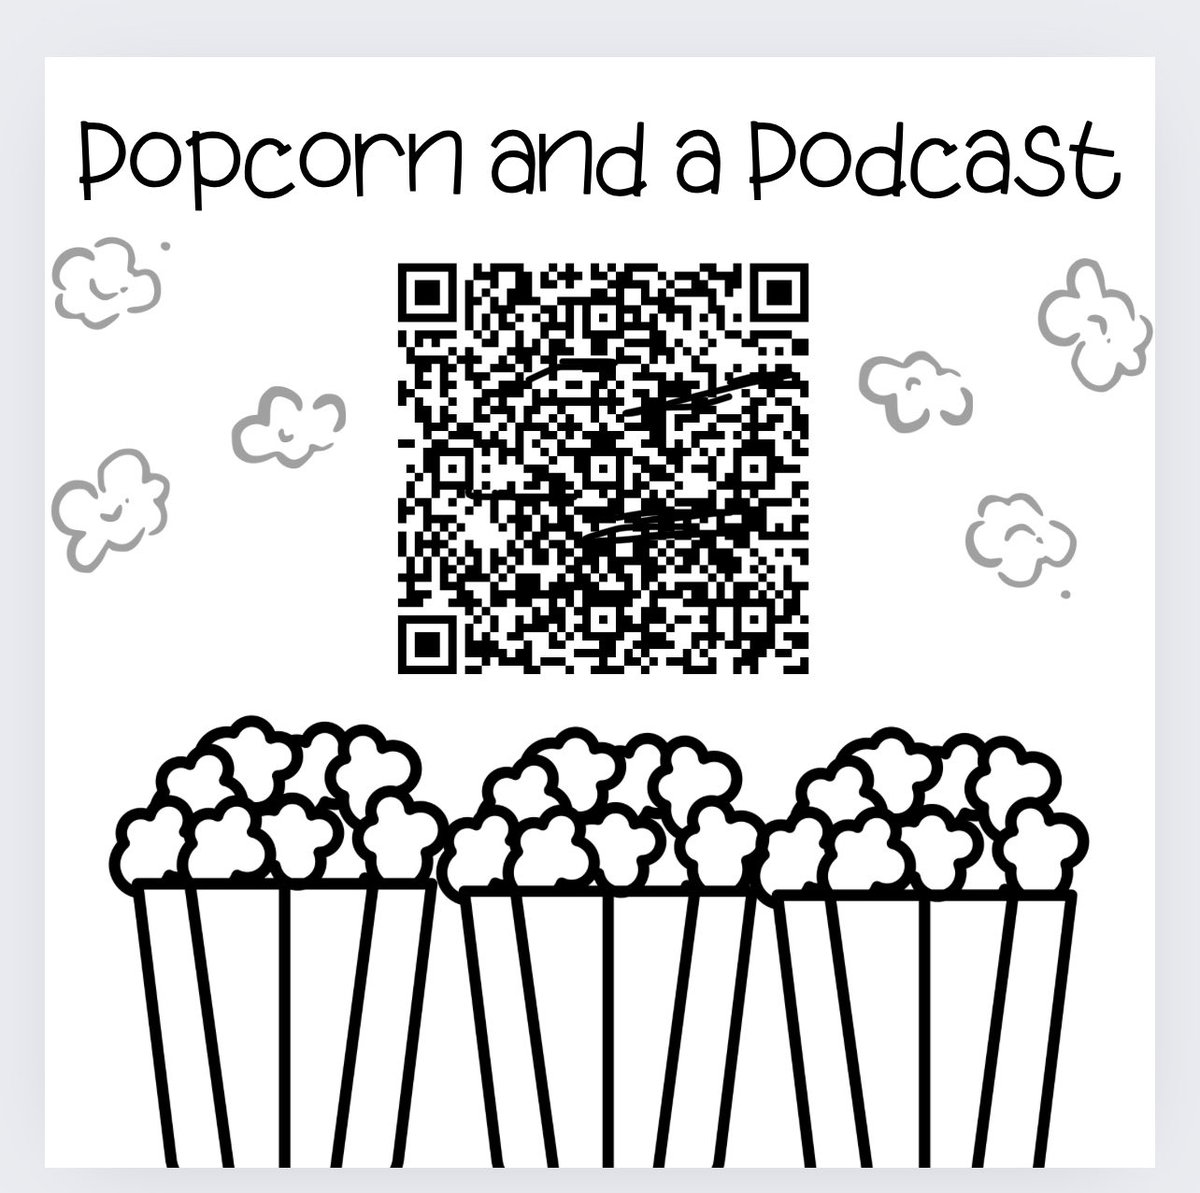 Have to present at my leadership meeting— you best believe they are going to walk away with a treat! Summer is great for reflection soooo why not reflect while eating popcorn and listening to a podcast?! #instructionalcoach #edtechcoach